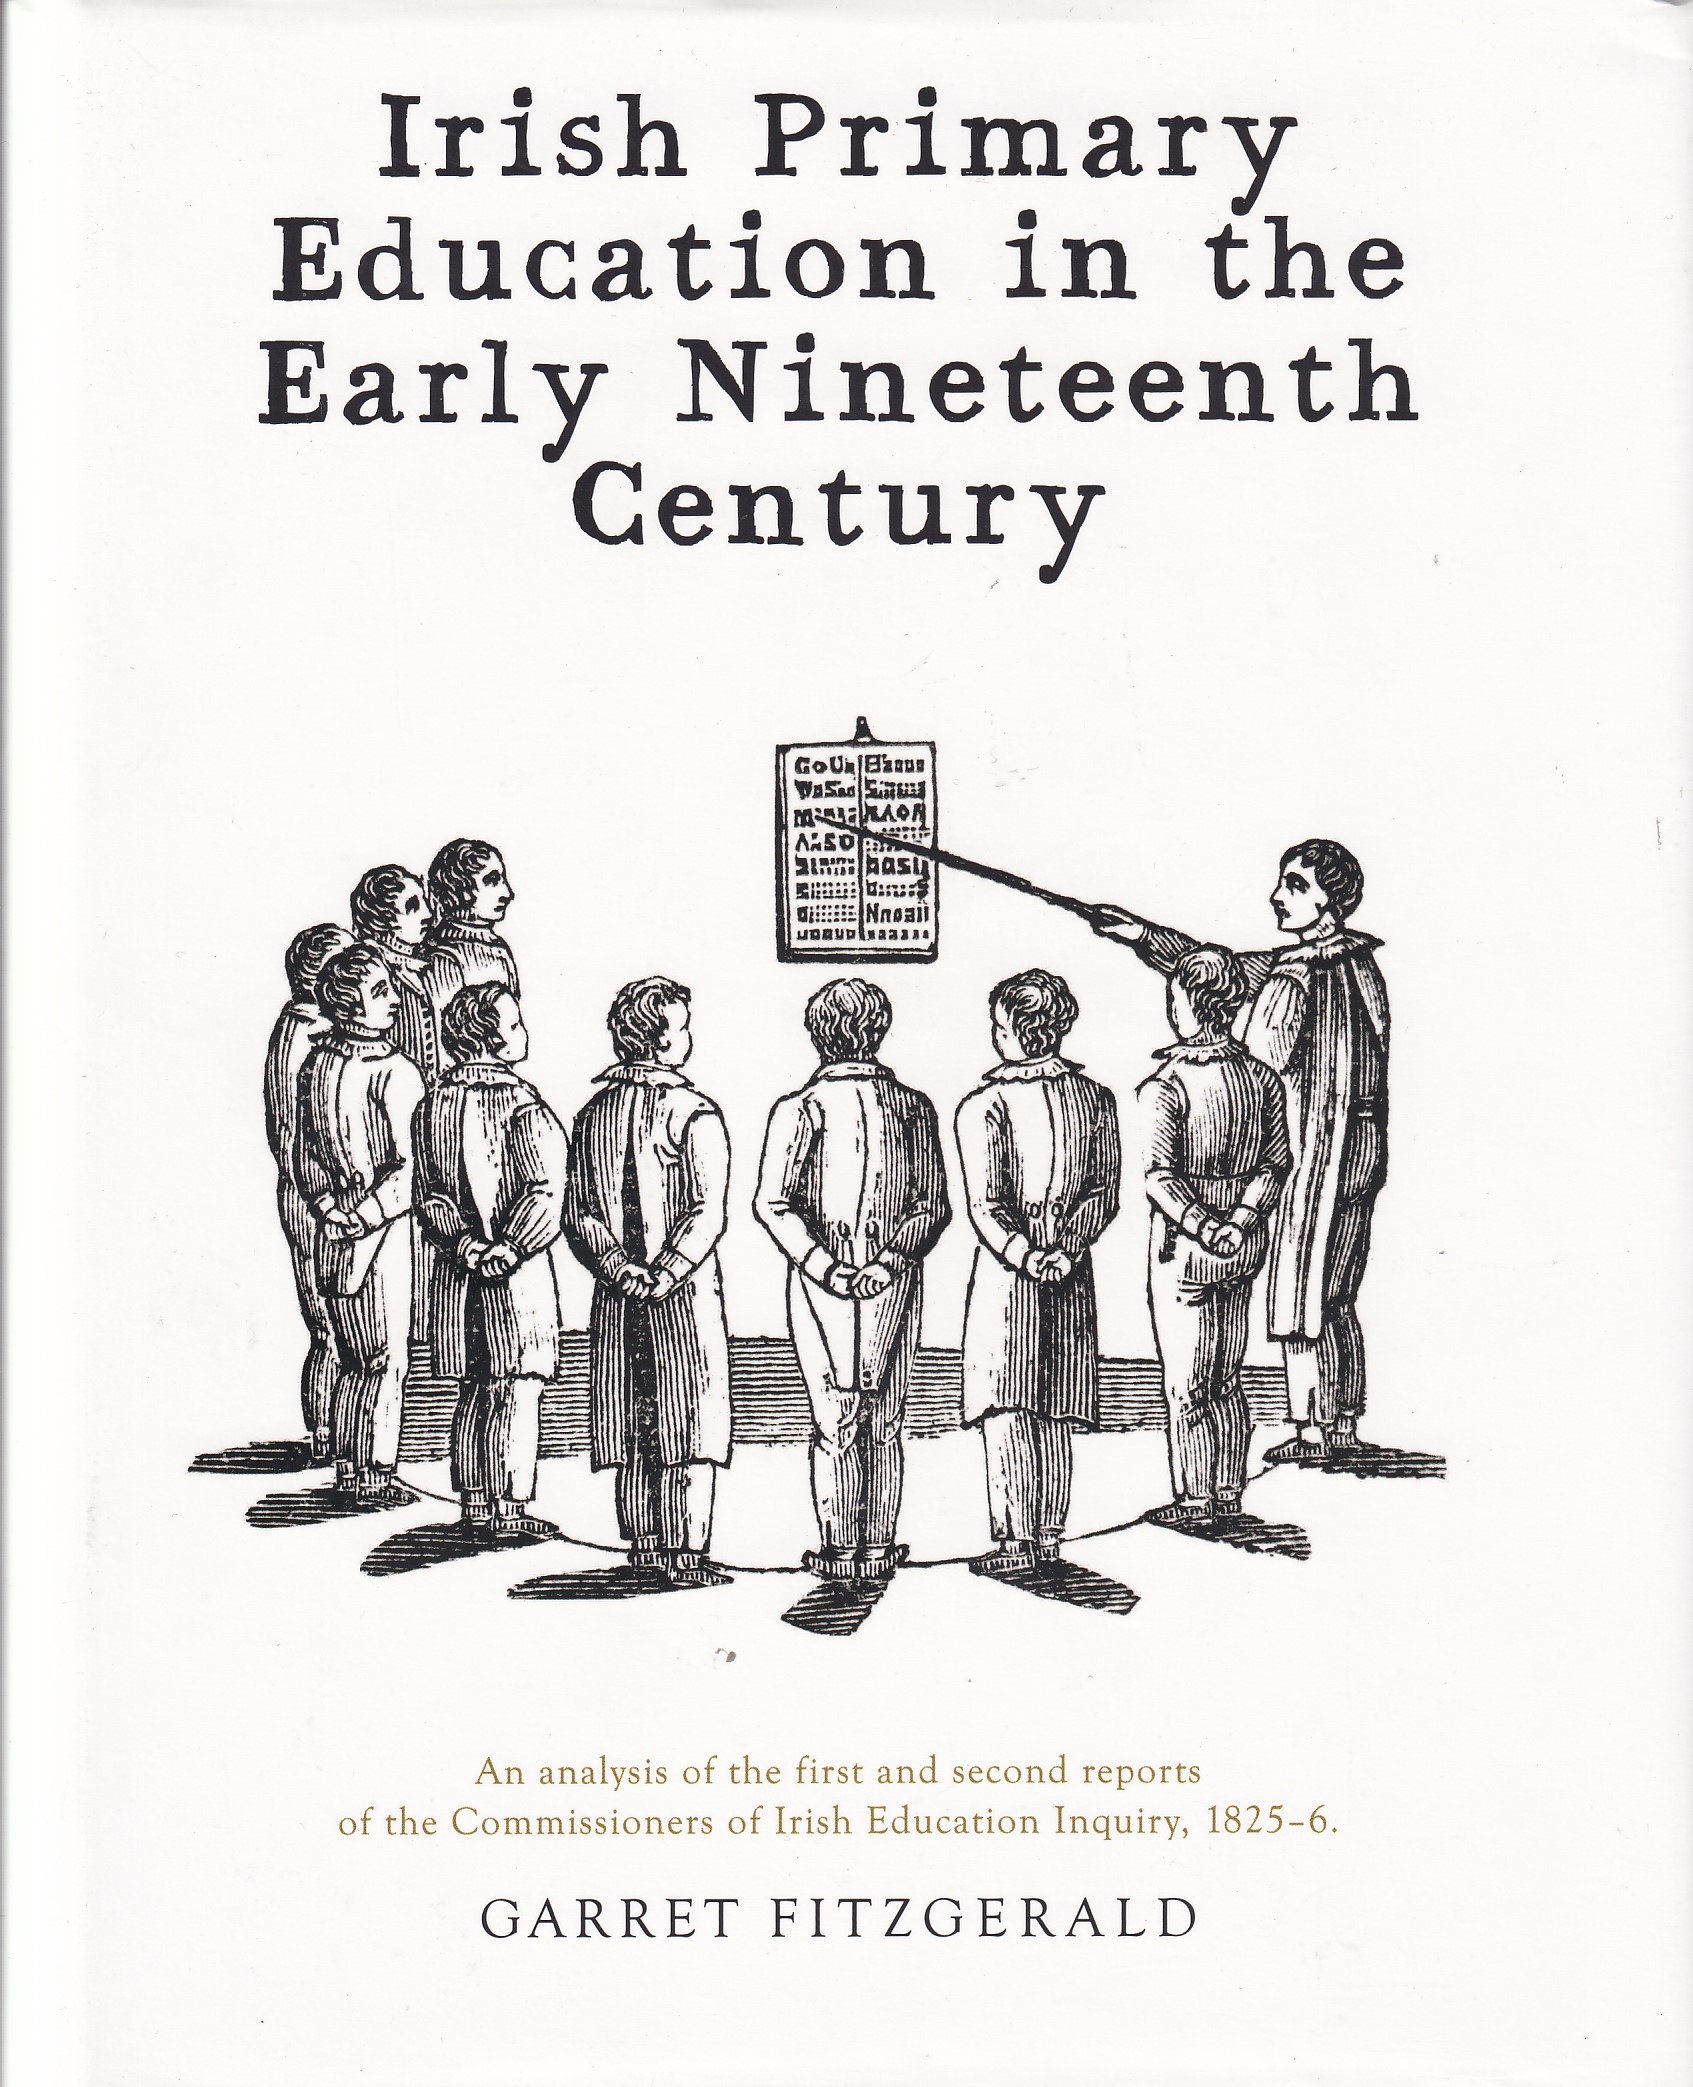 Irish Primary Education in the Early Nineteenth Century: An Analysis of the First and Second Reports of the Commissioners of Irish Education Inquiry, 1825-6 | Garret Fitzgerald | Charlie Byrne's